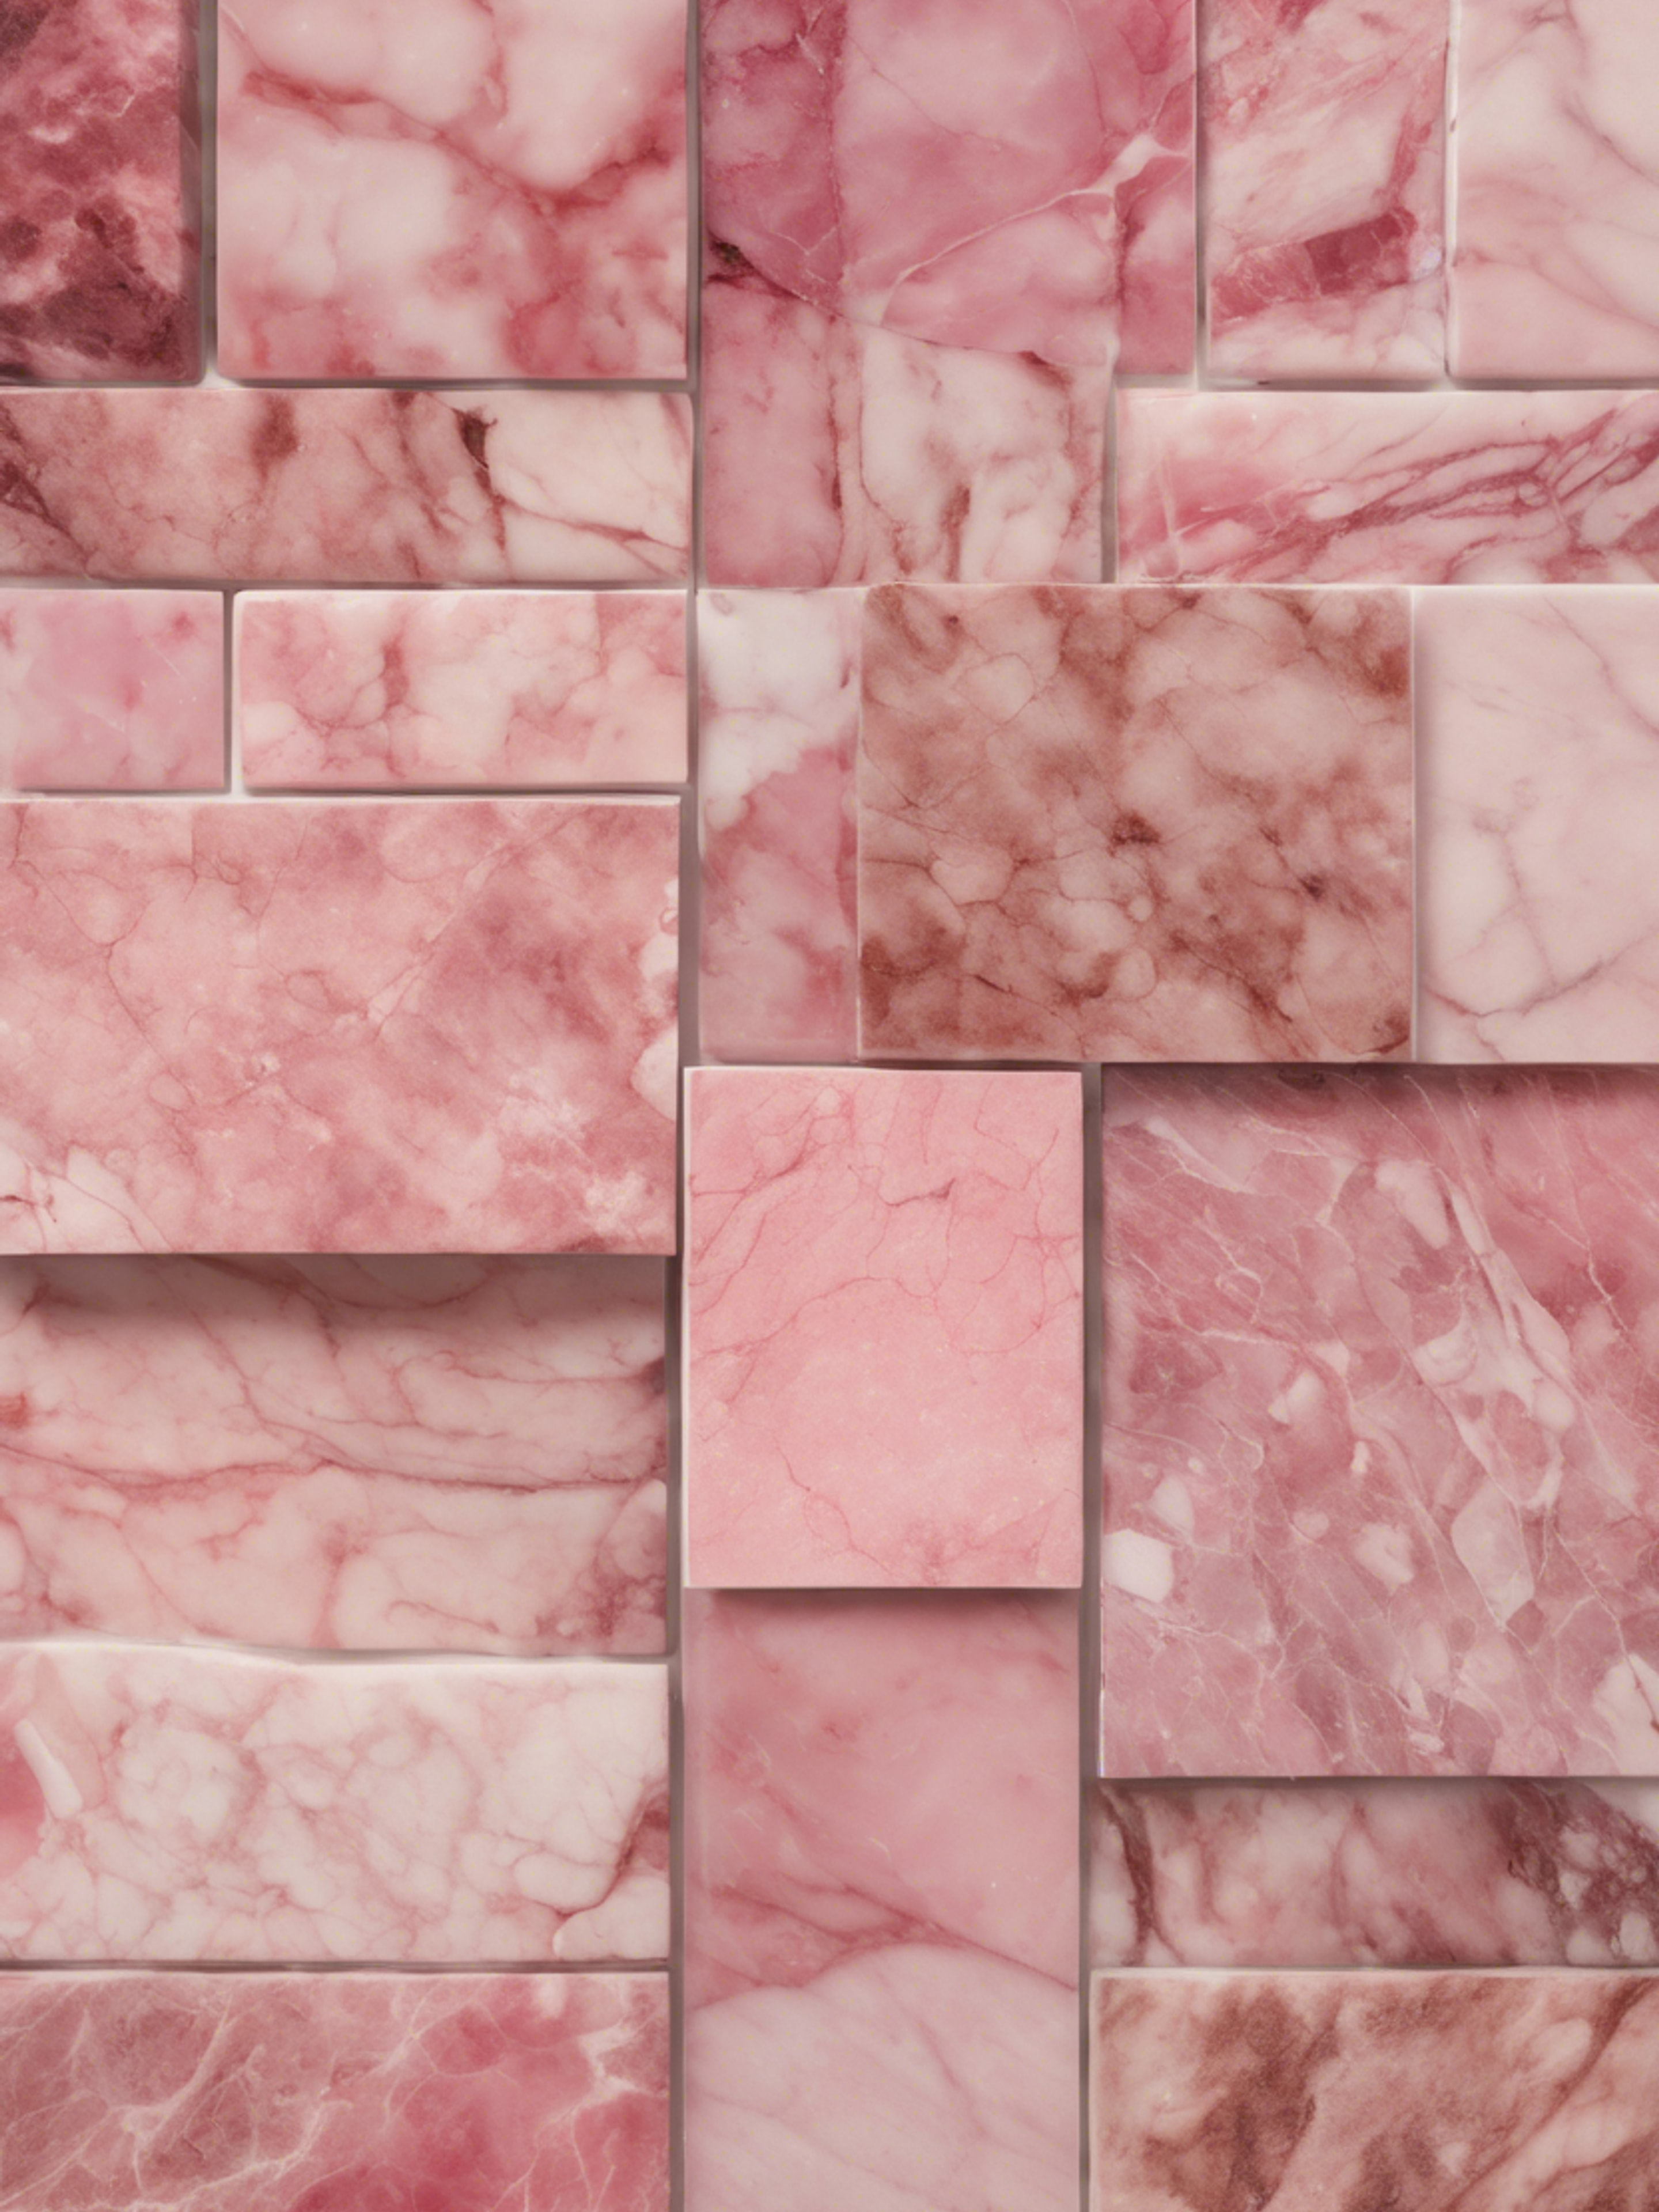 A choice of various textured shades of pink marble presented in a designer’s material palette. Wallpaper[83cdaf4d41d0458dbc7b]